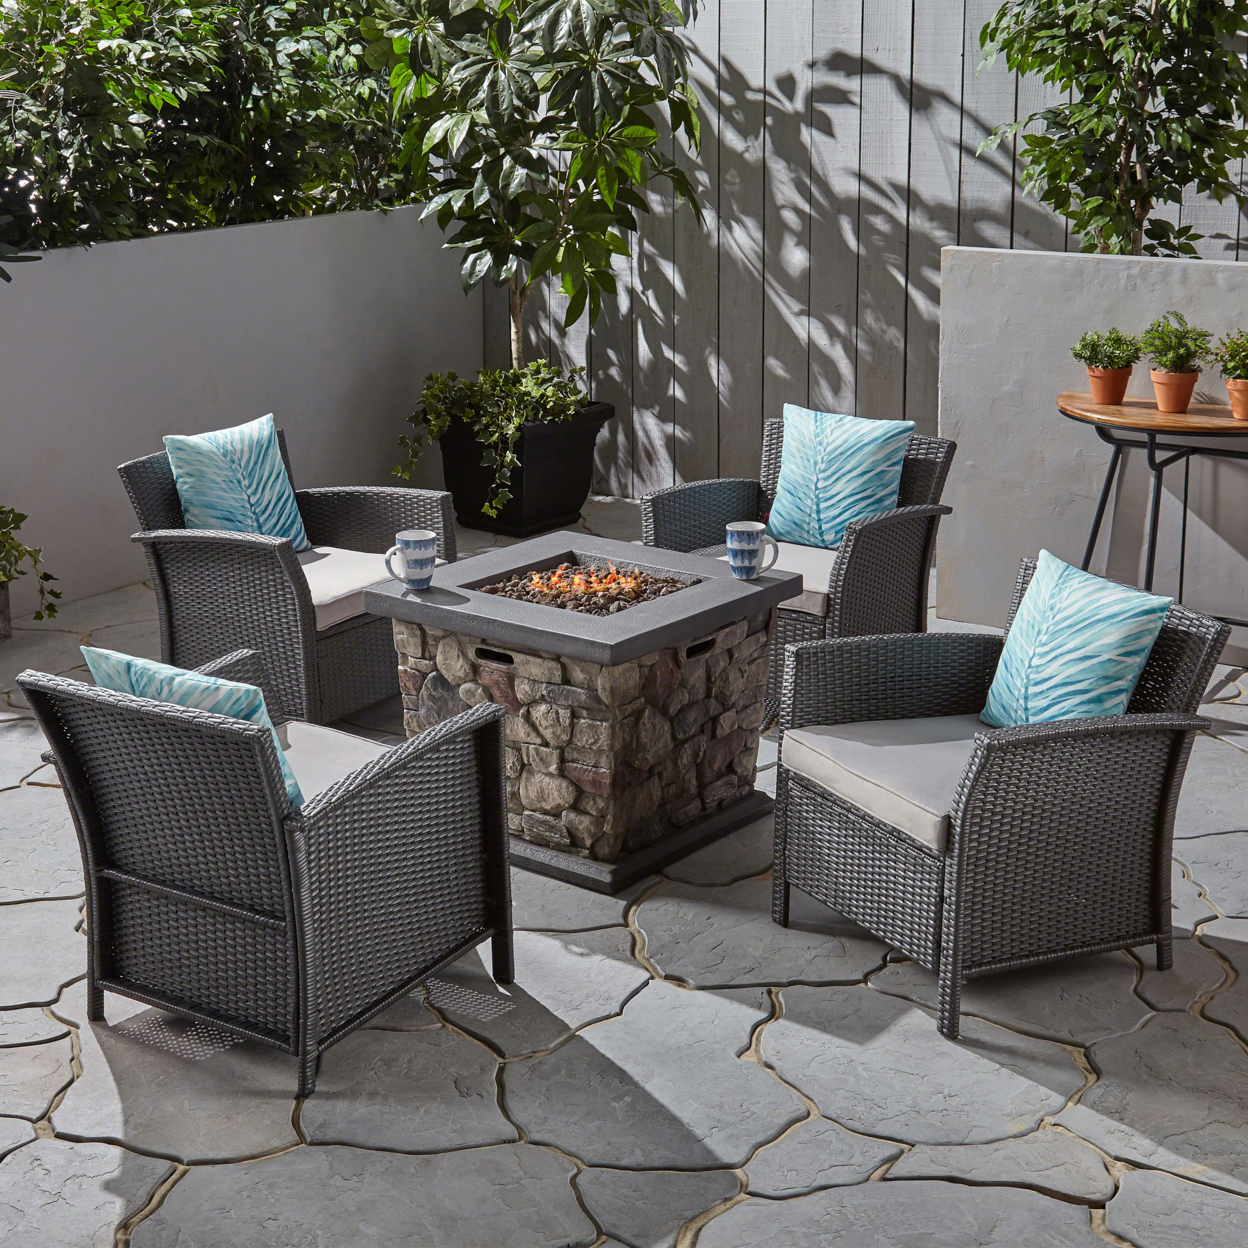 Abigail Outdoor 4 Piece Wicker Club Chair Chat Set With Fire Pit - Gray + Silver + Stone